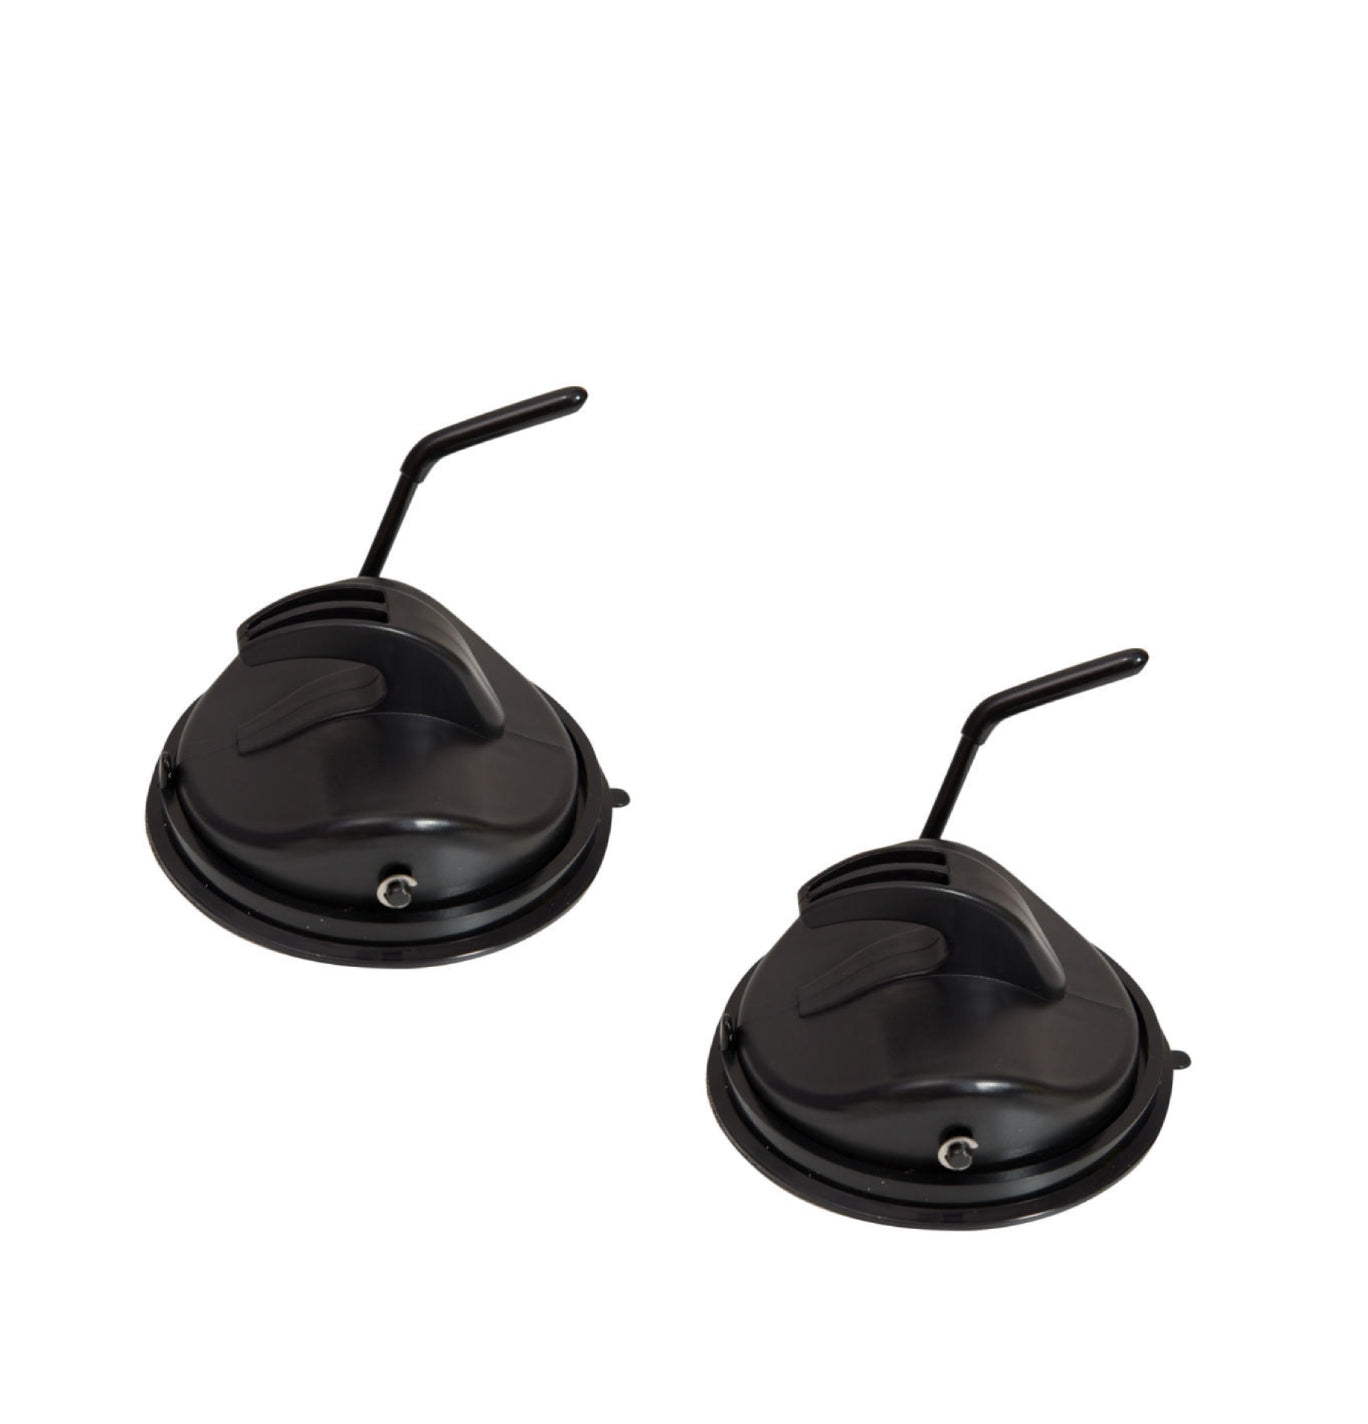 Reimo Camp4 Super Power Suction Cup | 2 Pack Image